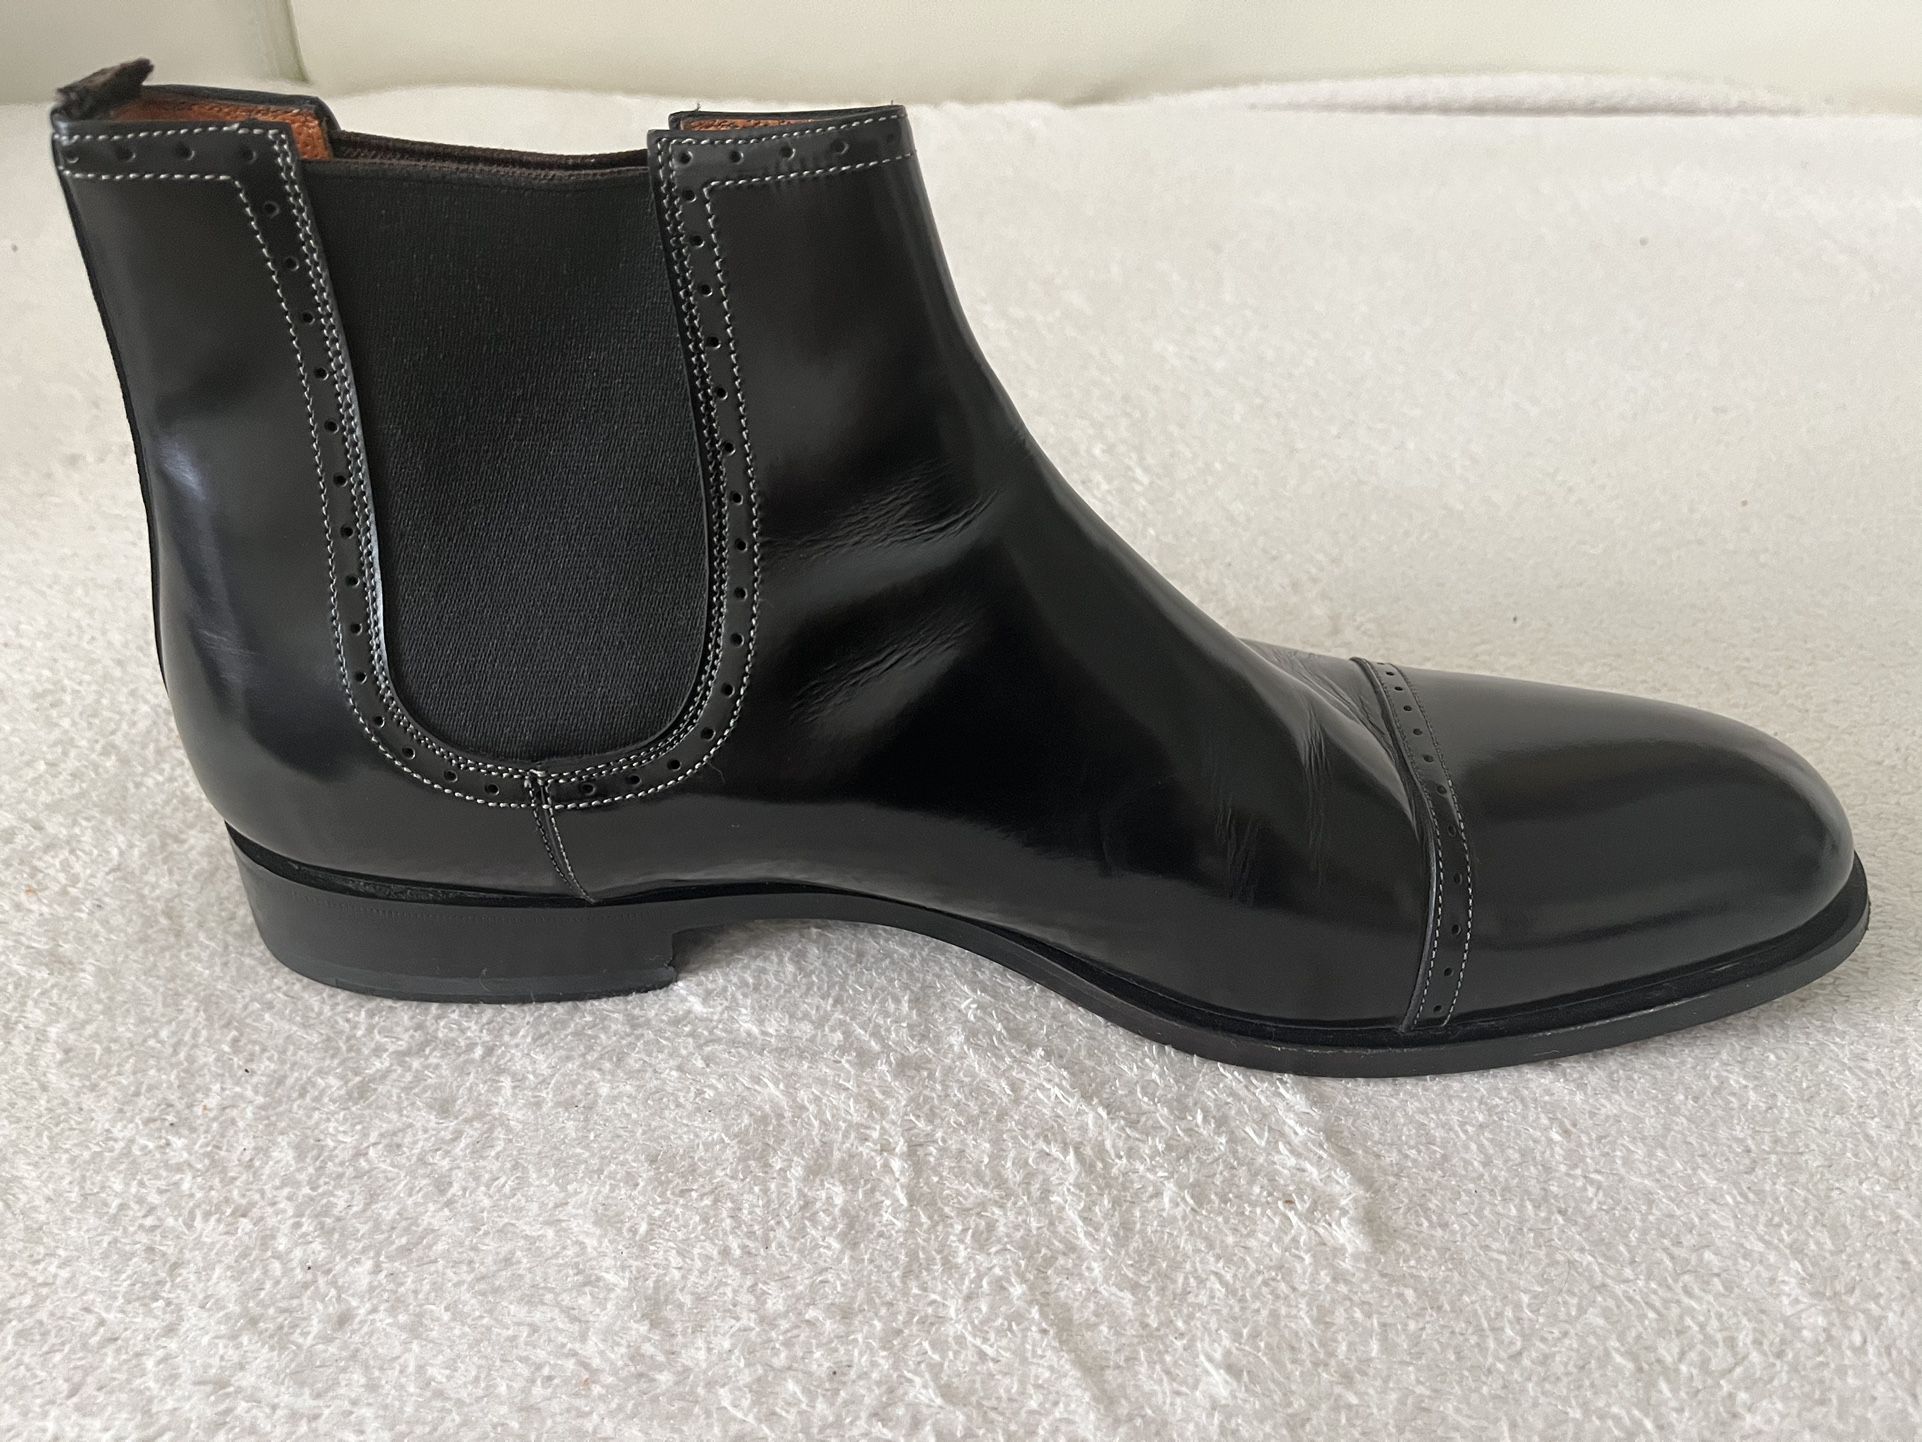 Men’s Boots, Black, Leather, Size 10 (US 11), Made In Italy